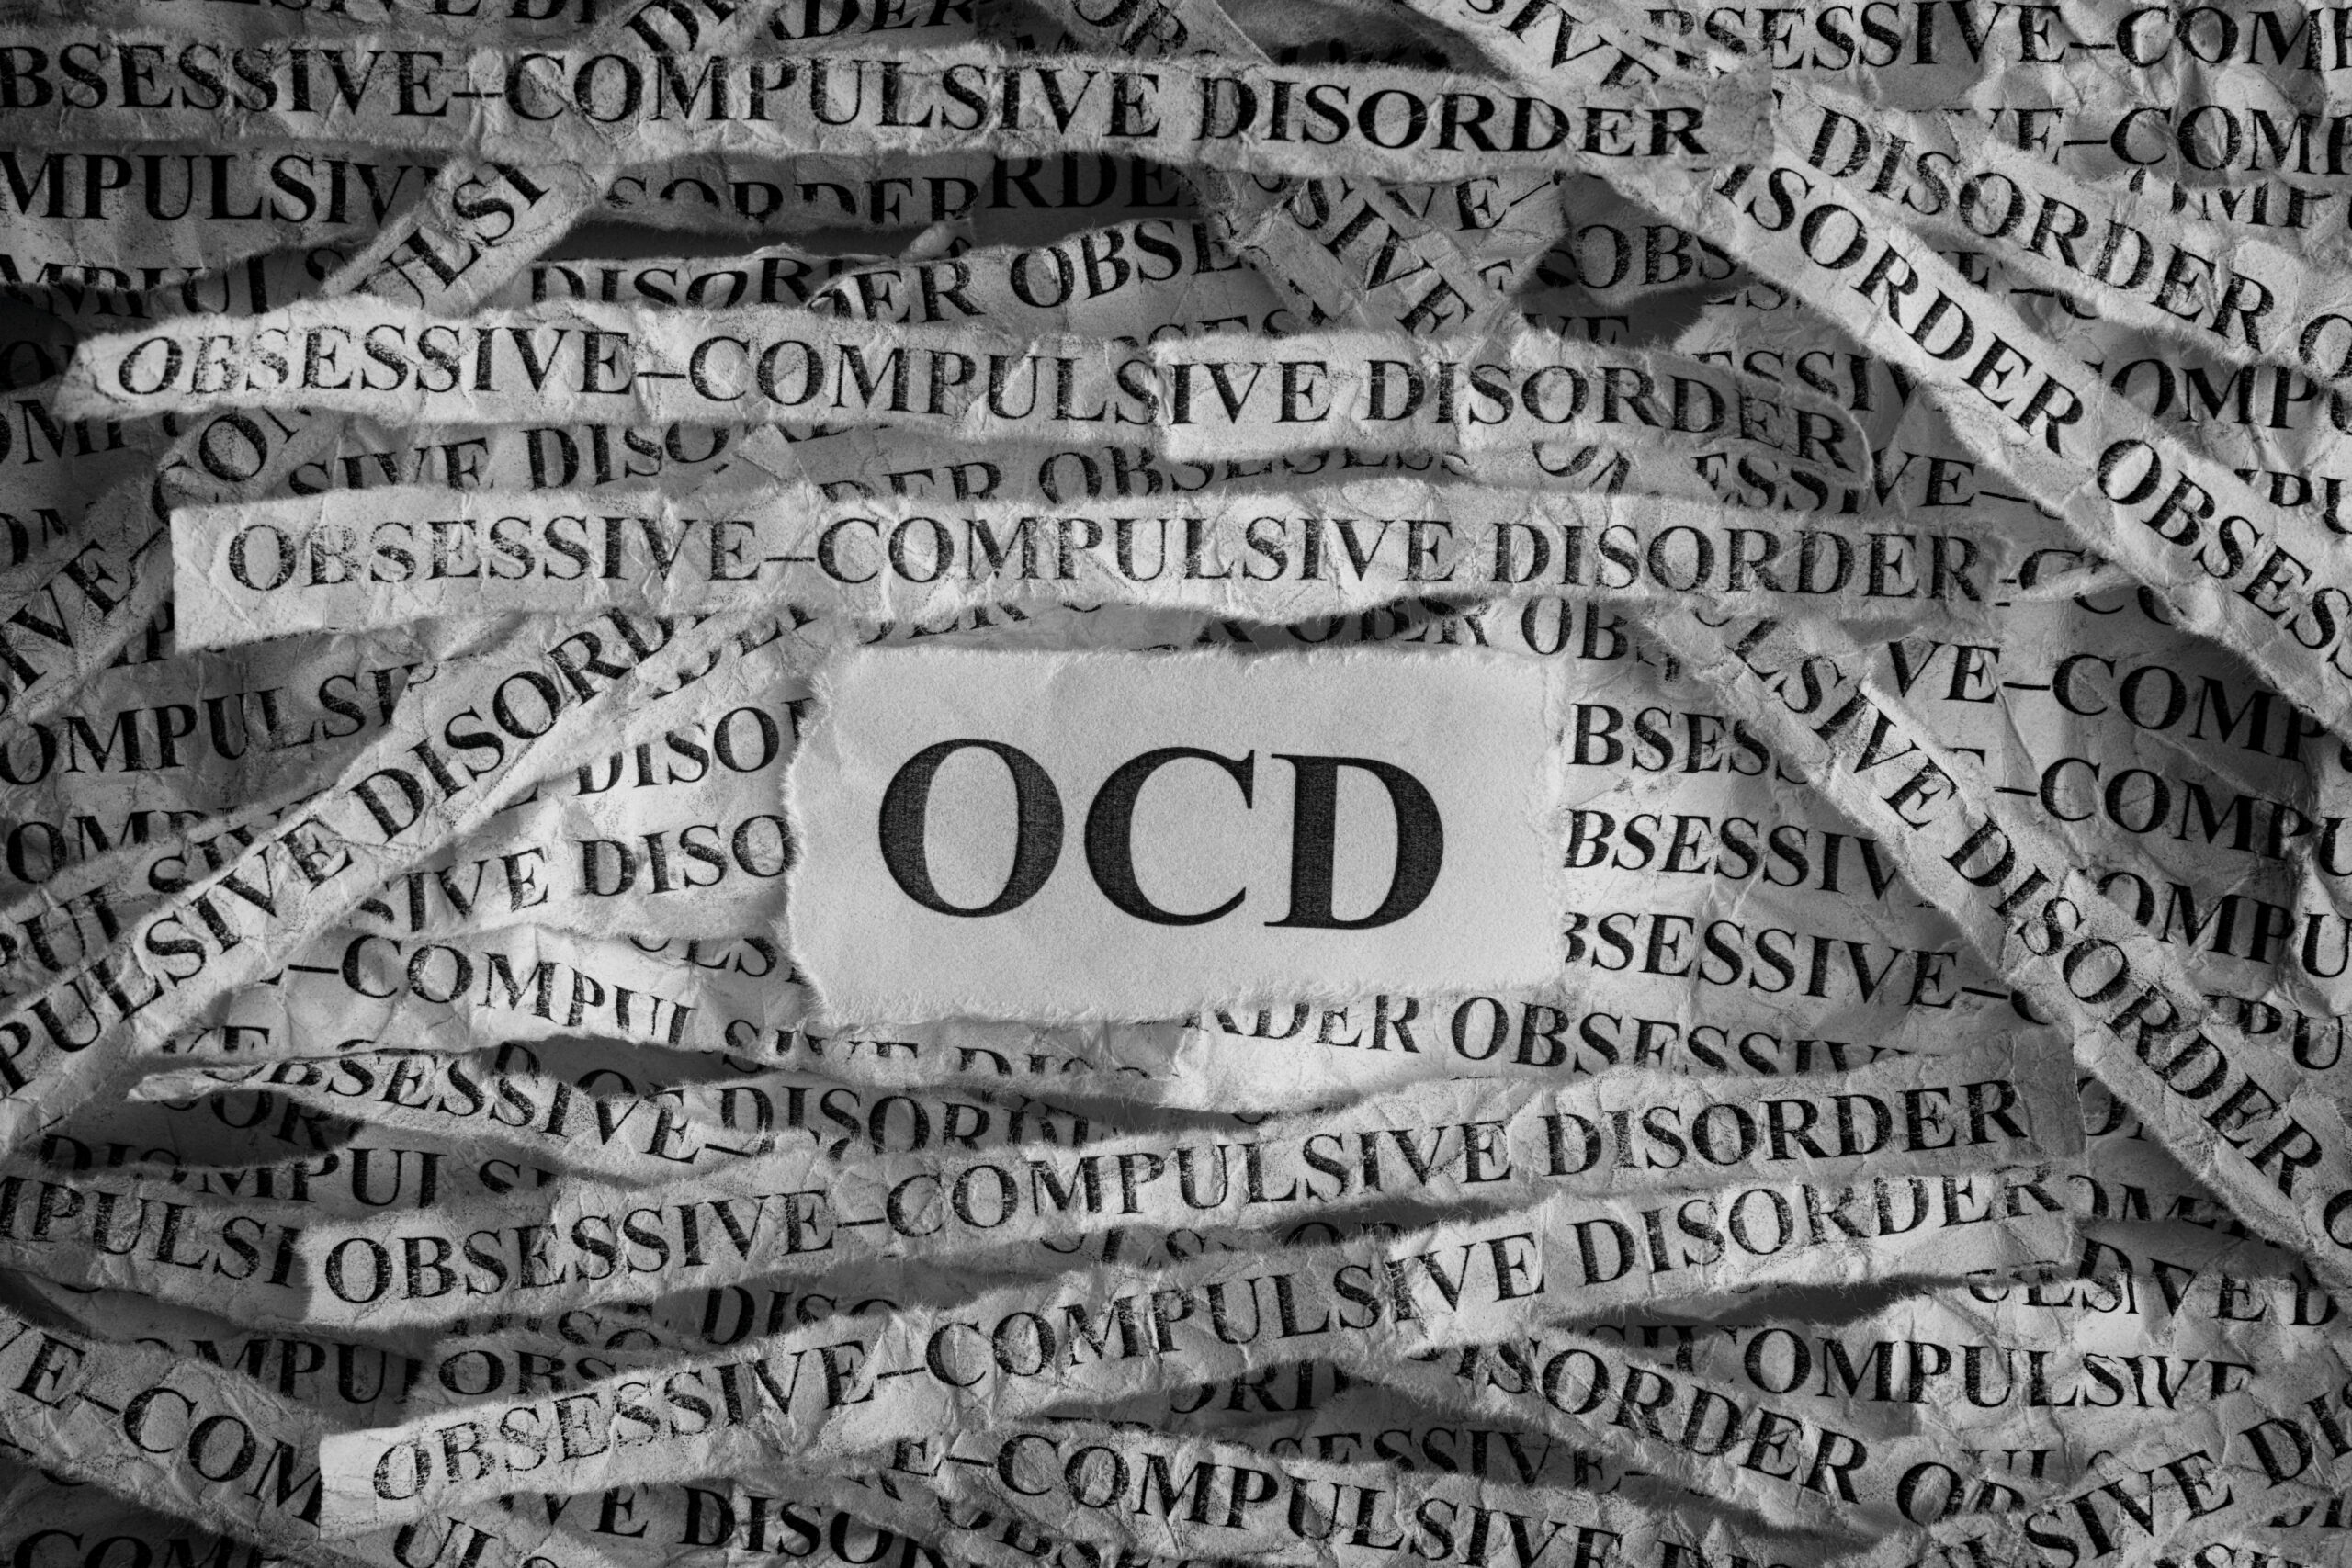 How Reinforcement Learning Influence Obsessions and Compulsions in OCD Individuals